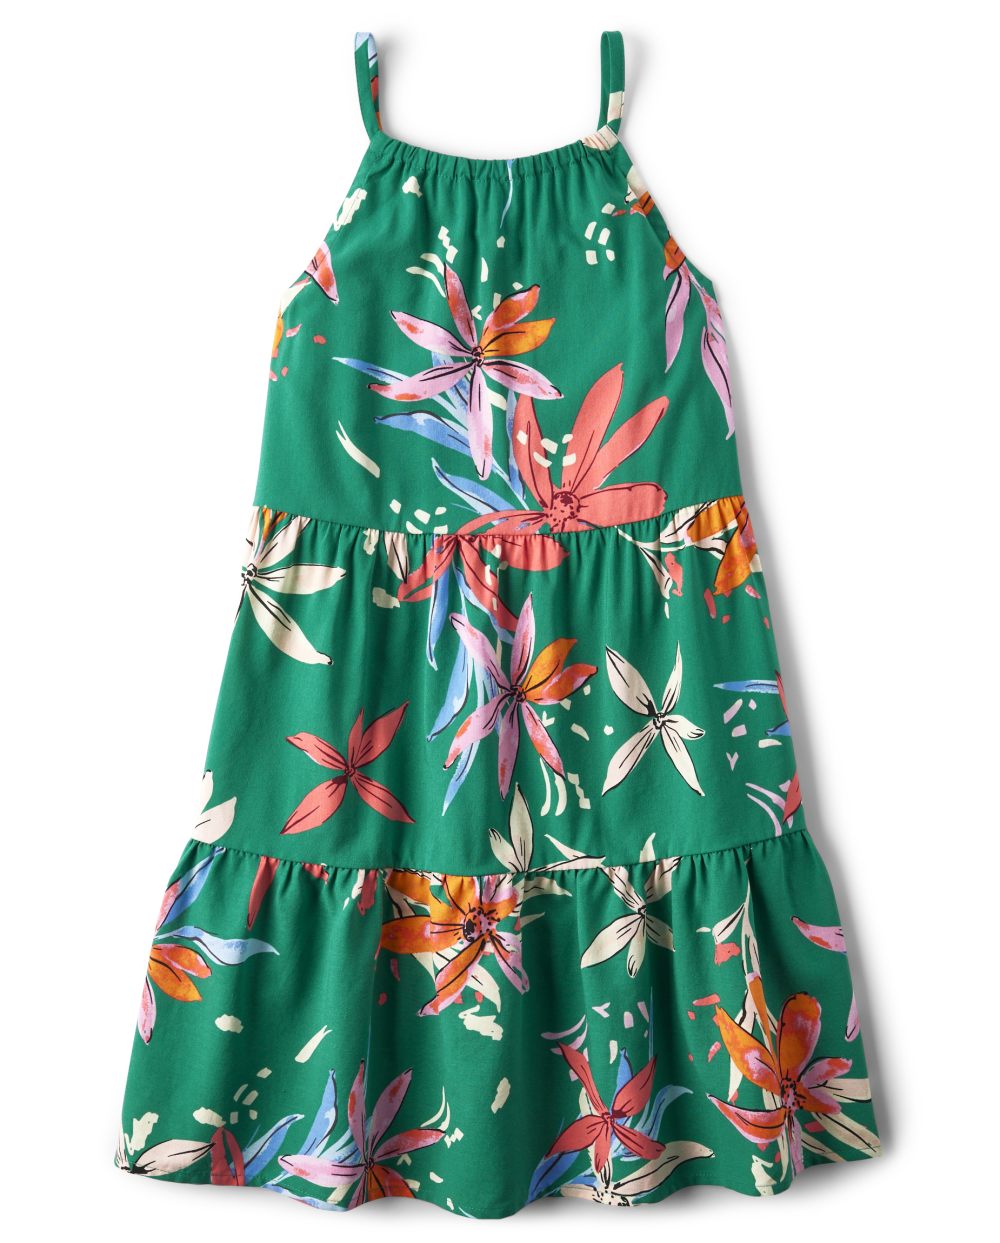 Girls Above the Knee Floral Tropical Print Tiered Halter Sleeveless Dress